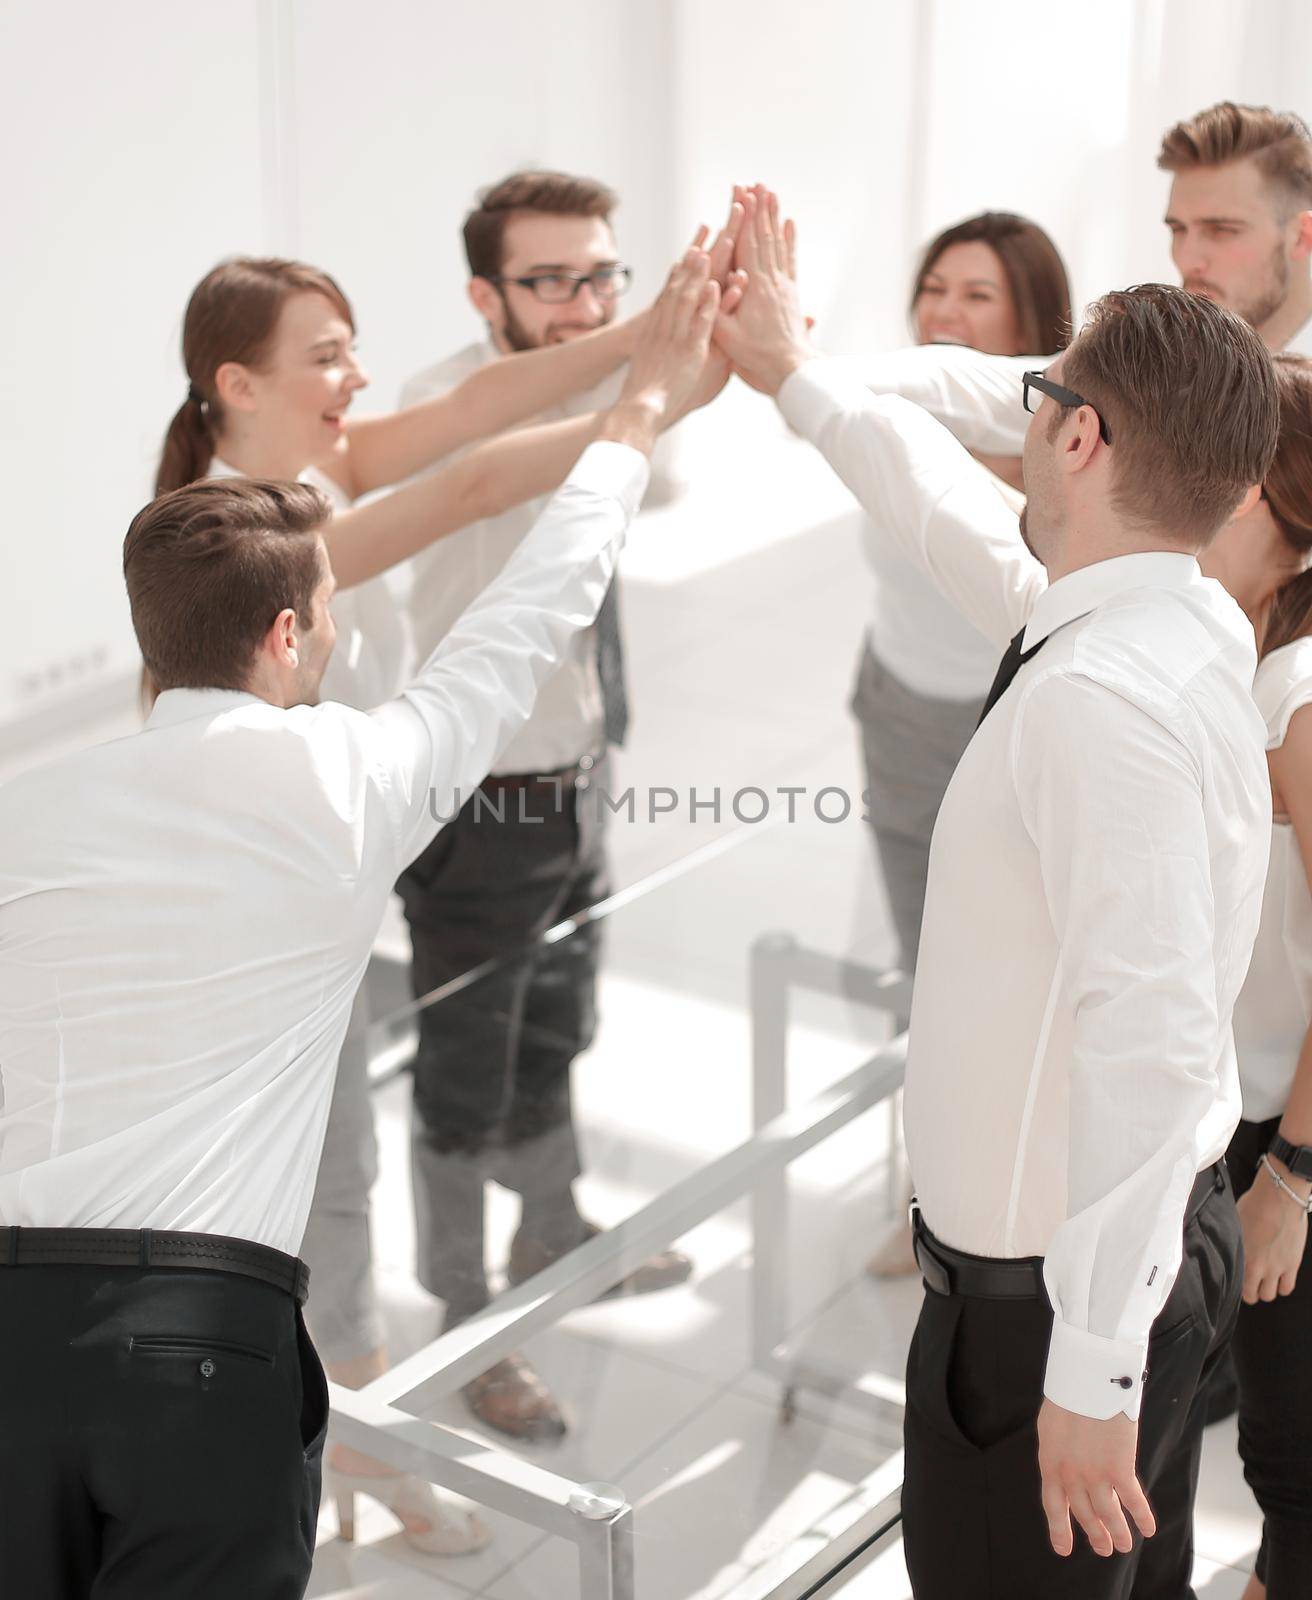 successful business teams make a high five over their Desk.photo with copy space